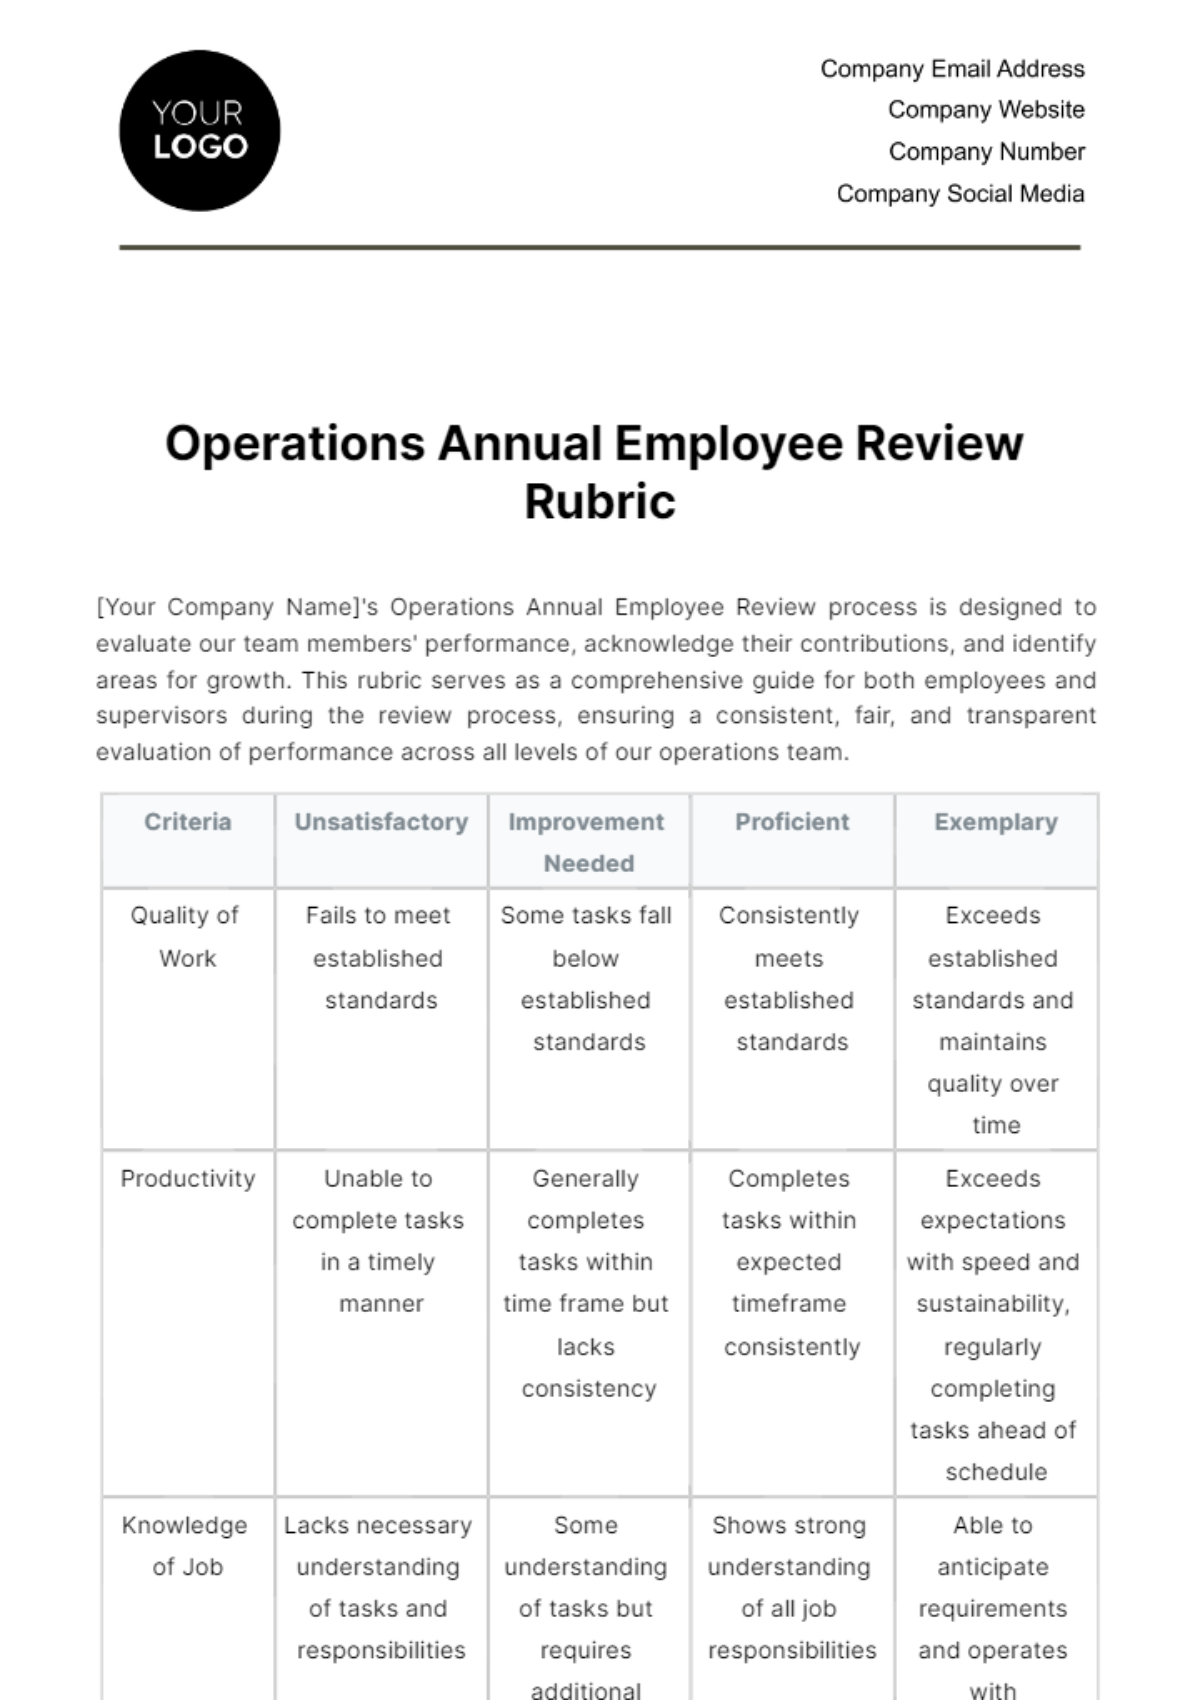 Free Operations Annual Employee Review Rubric Template